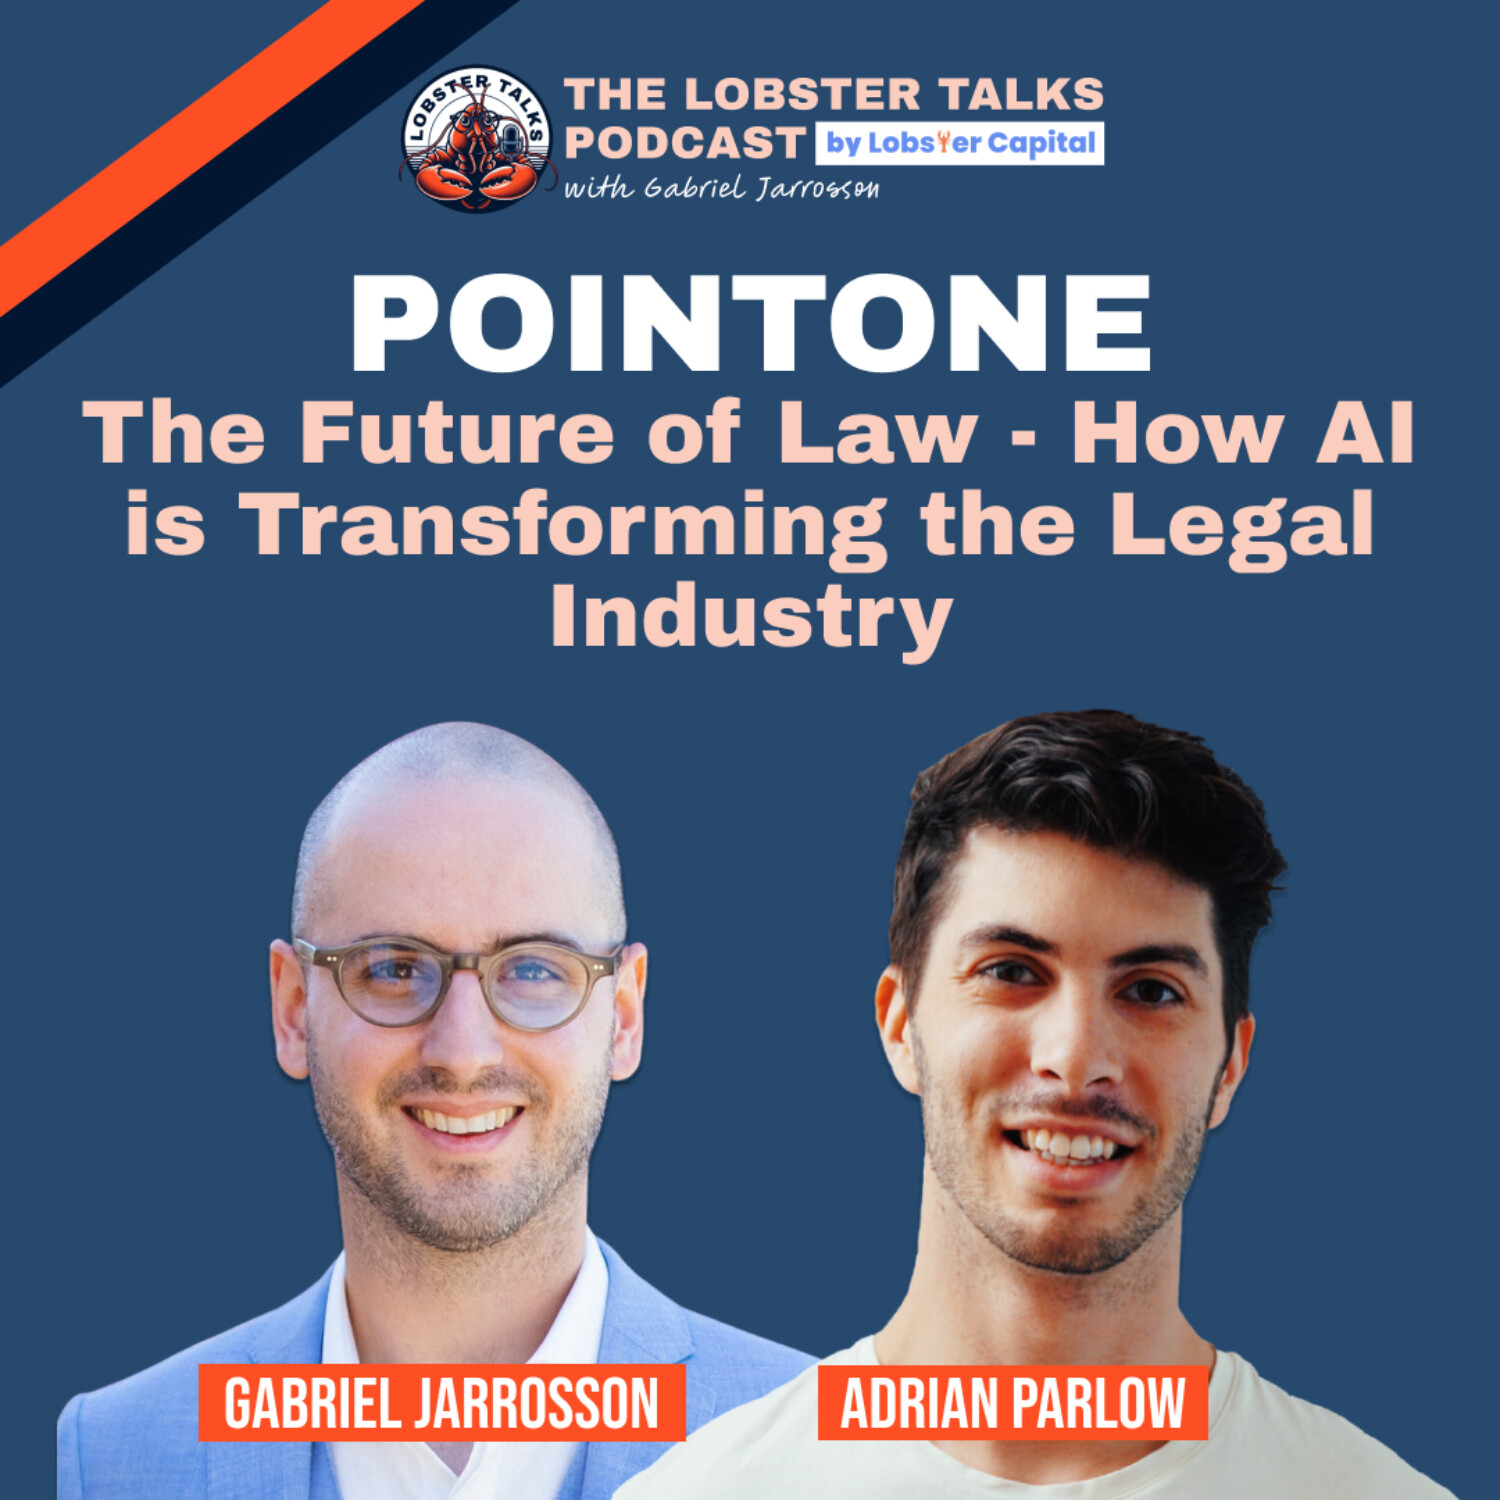 PointOne: The Future of Law - How AI is Transforming the Legal Industry